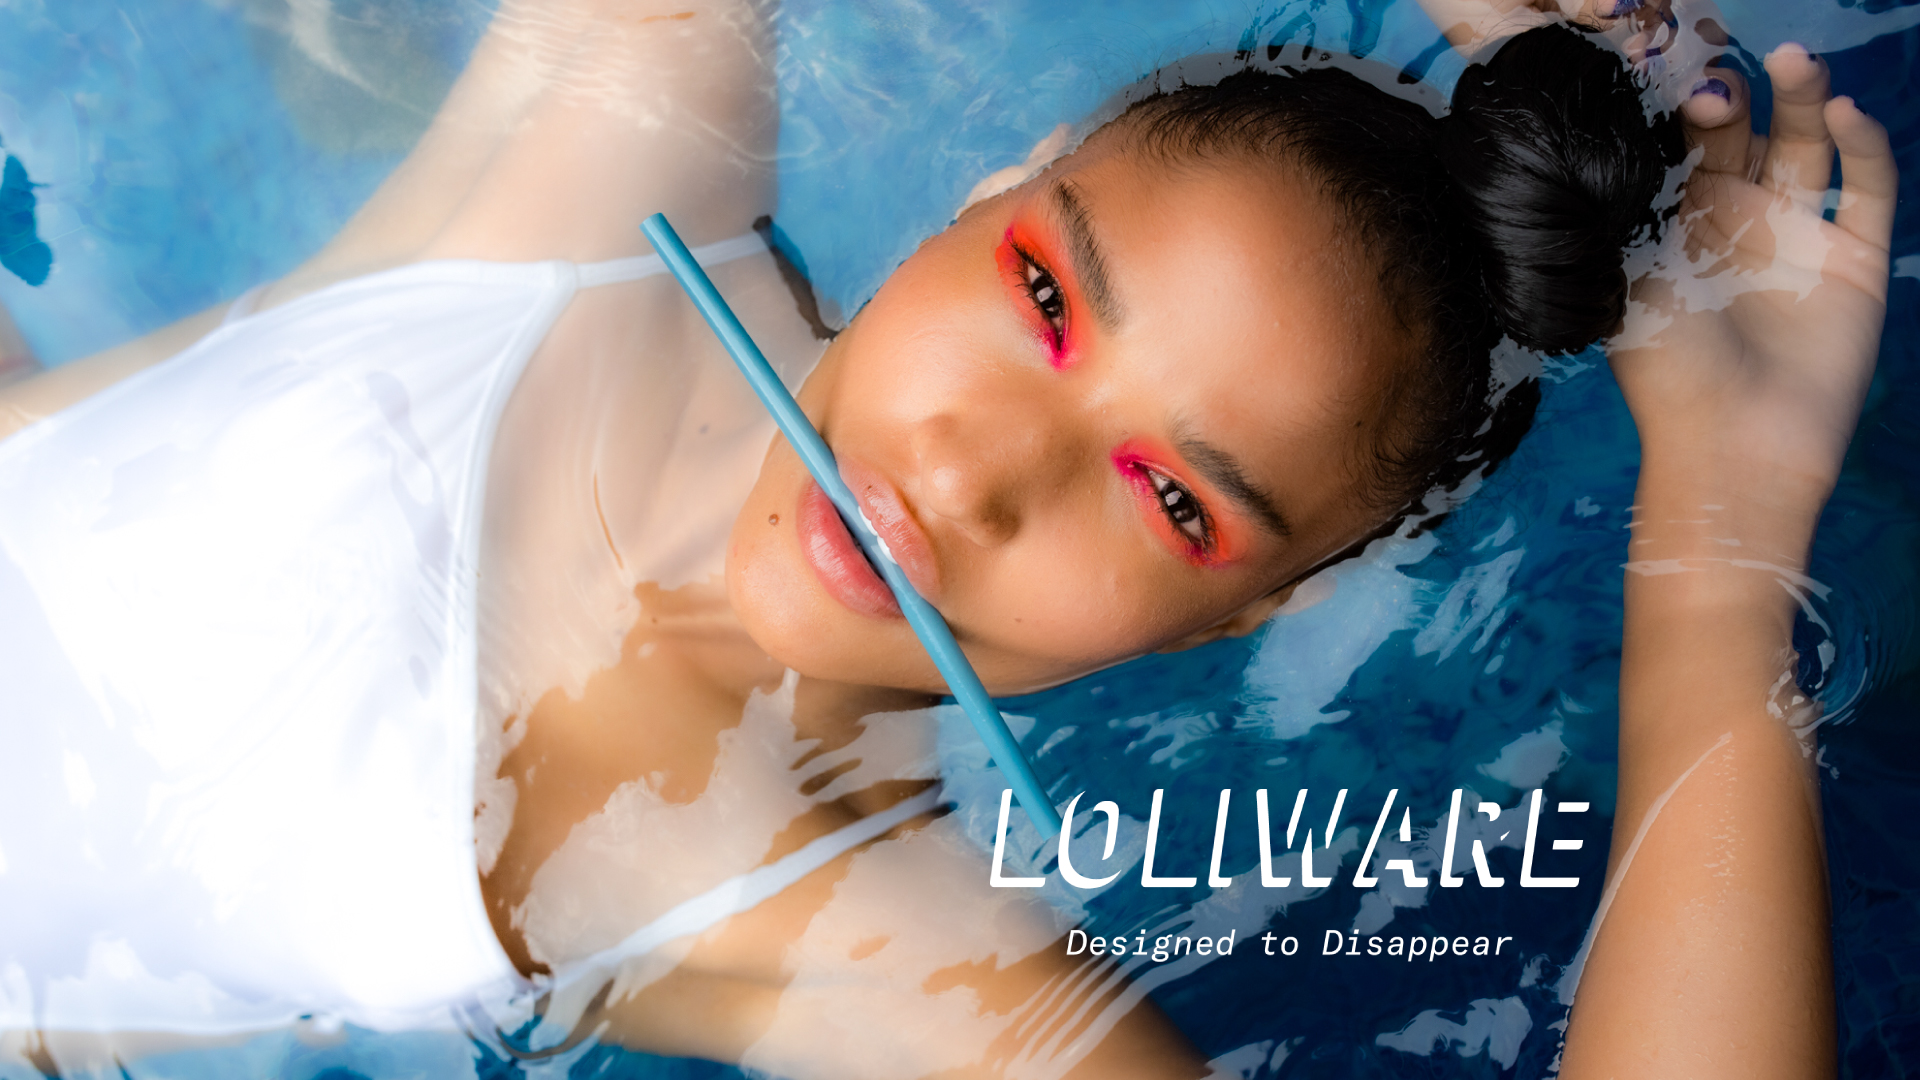 Loliwareâ€™s kelp-based plastic alternatives snag $6M seed round from eco-conscious investors